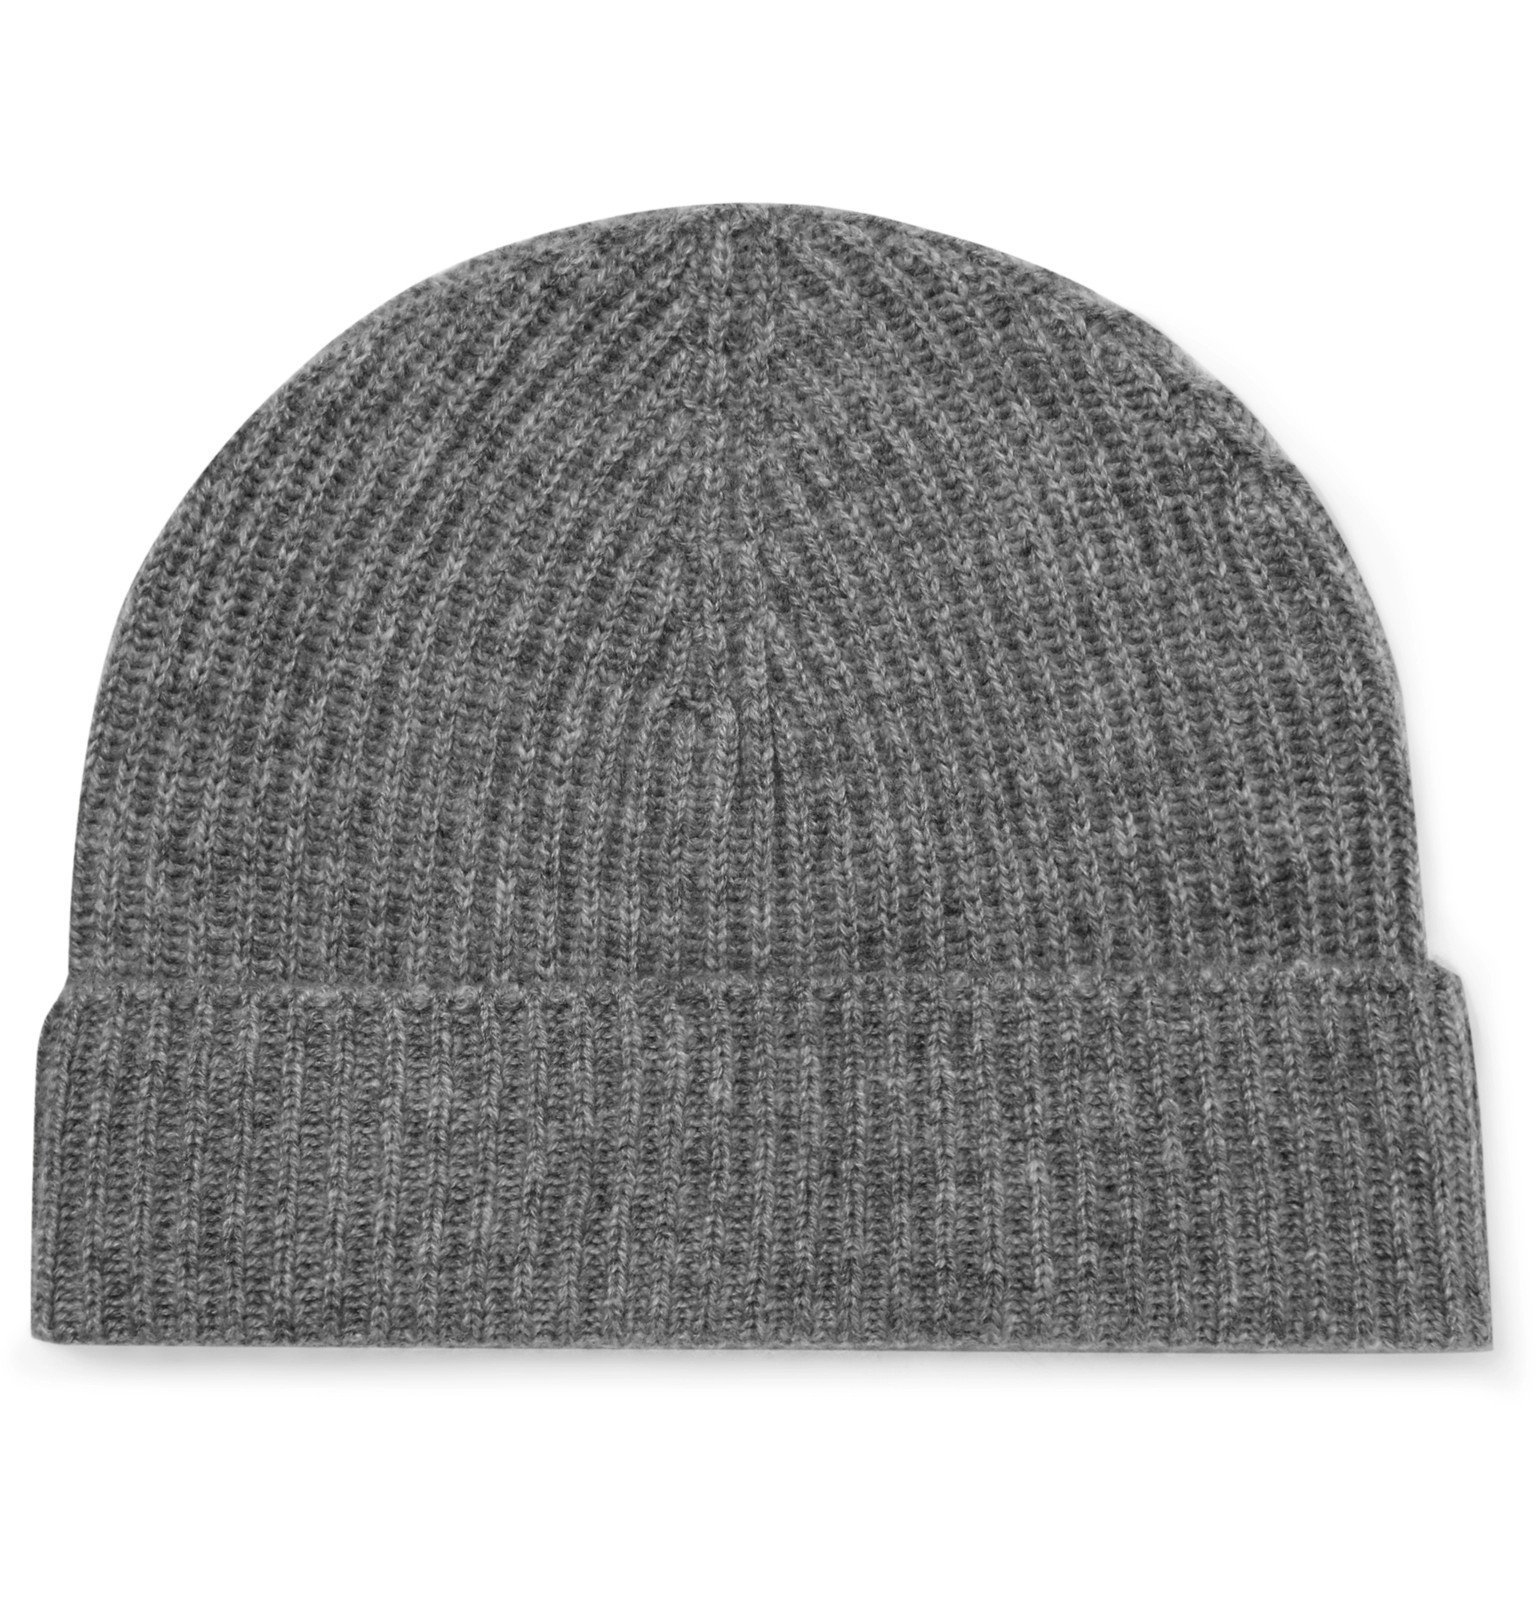 Lock & Co Hatters - Ribbed Cashmere Beanie - Gray Lock & Co Hatters